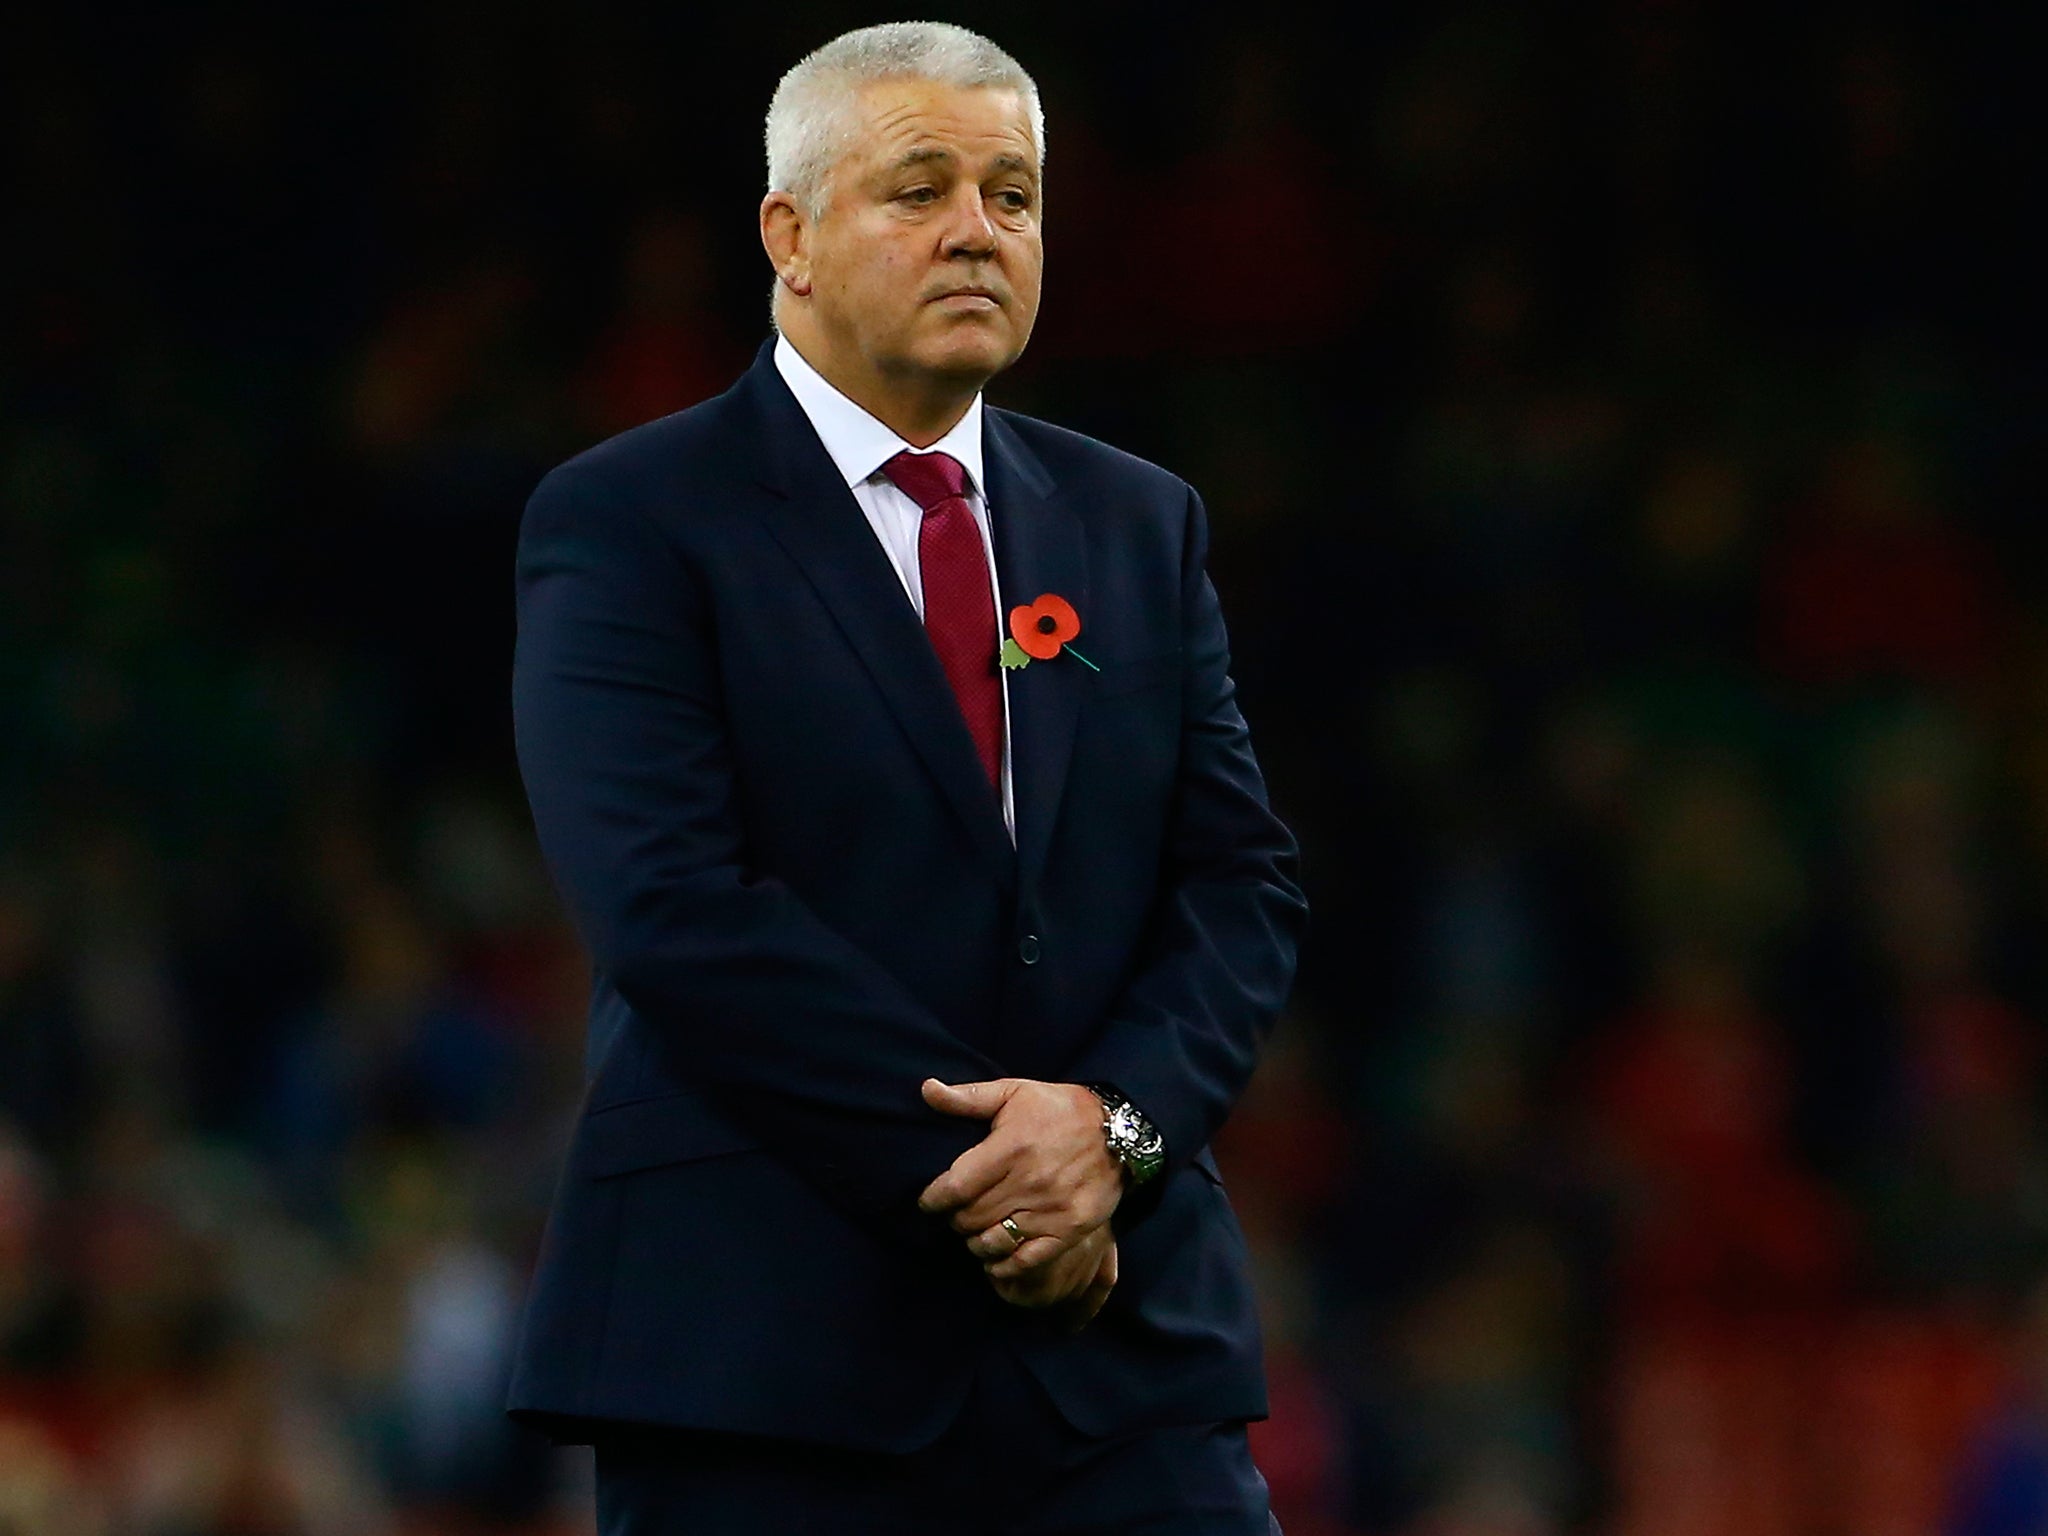 Warren Gatland has rotated 14 of his starting line-up